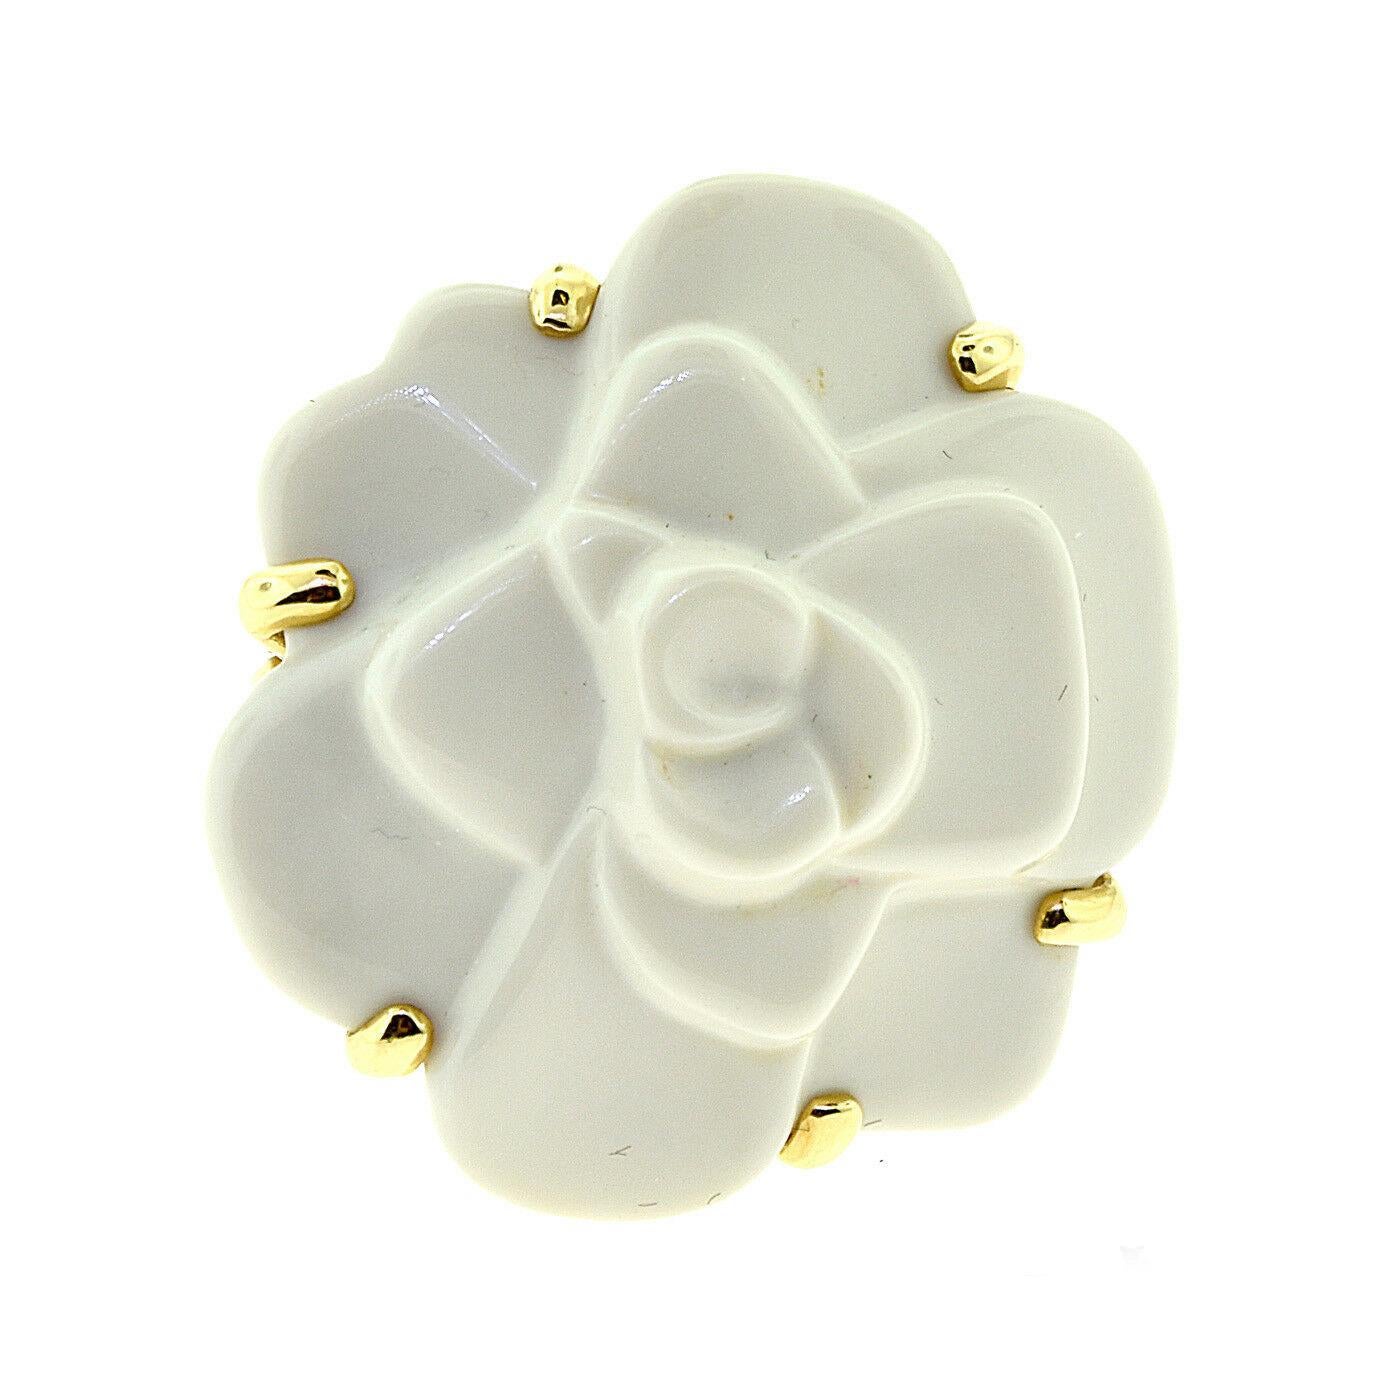 Chanel Camellia Agate Large Flower Cocktail Ring in 18 Karat Yellow Gold 1